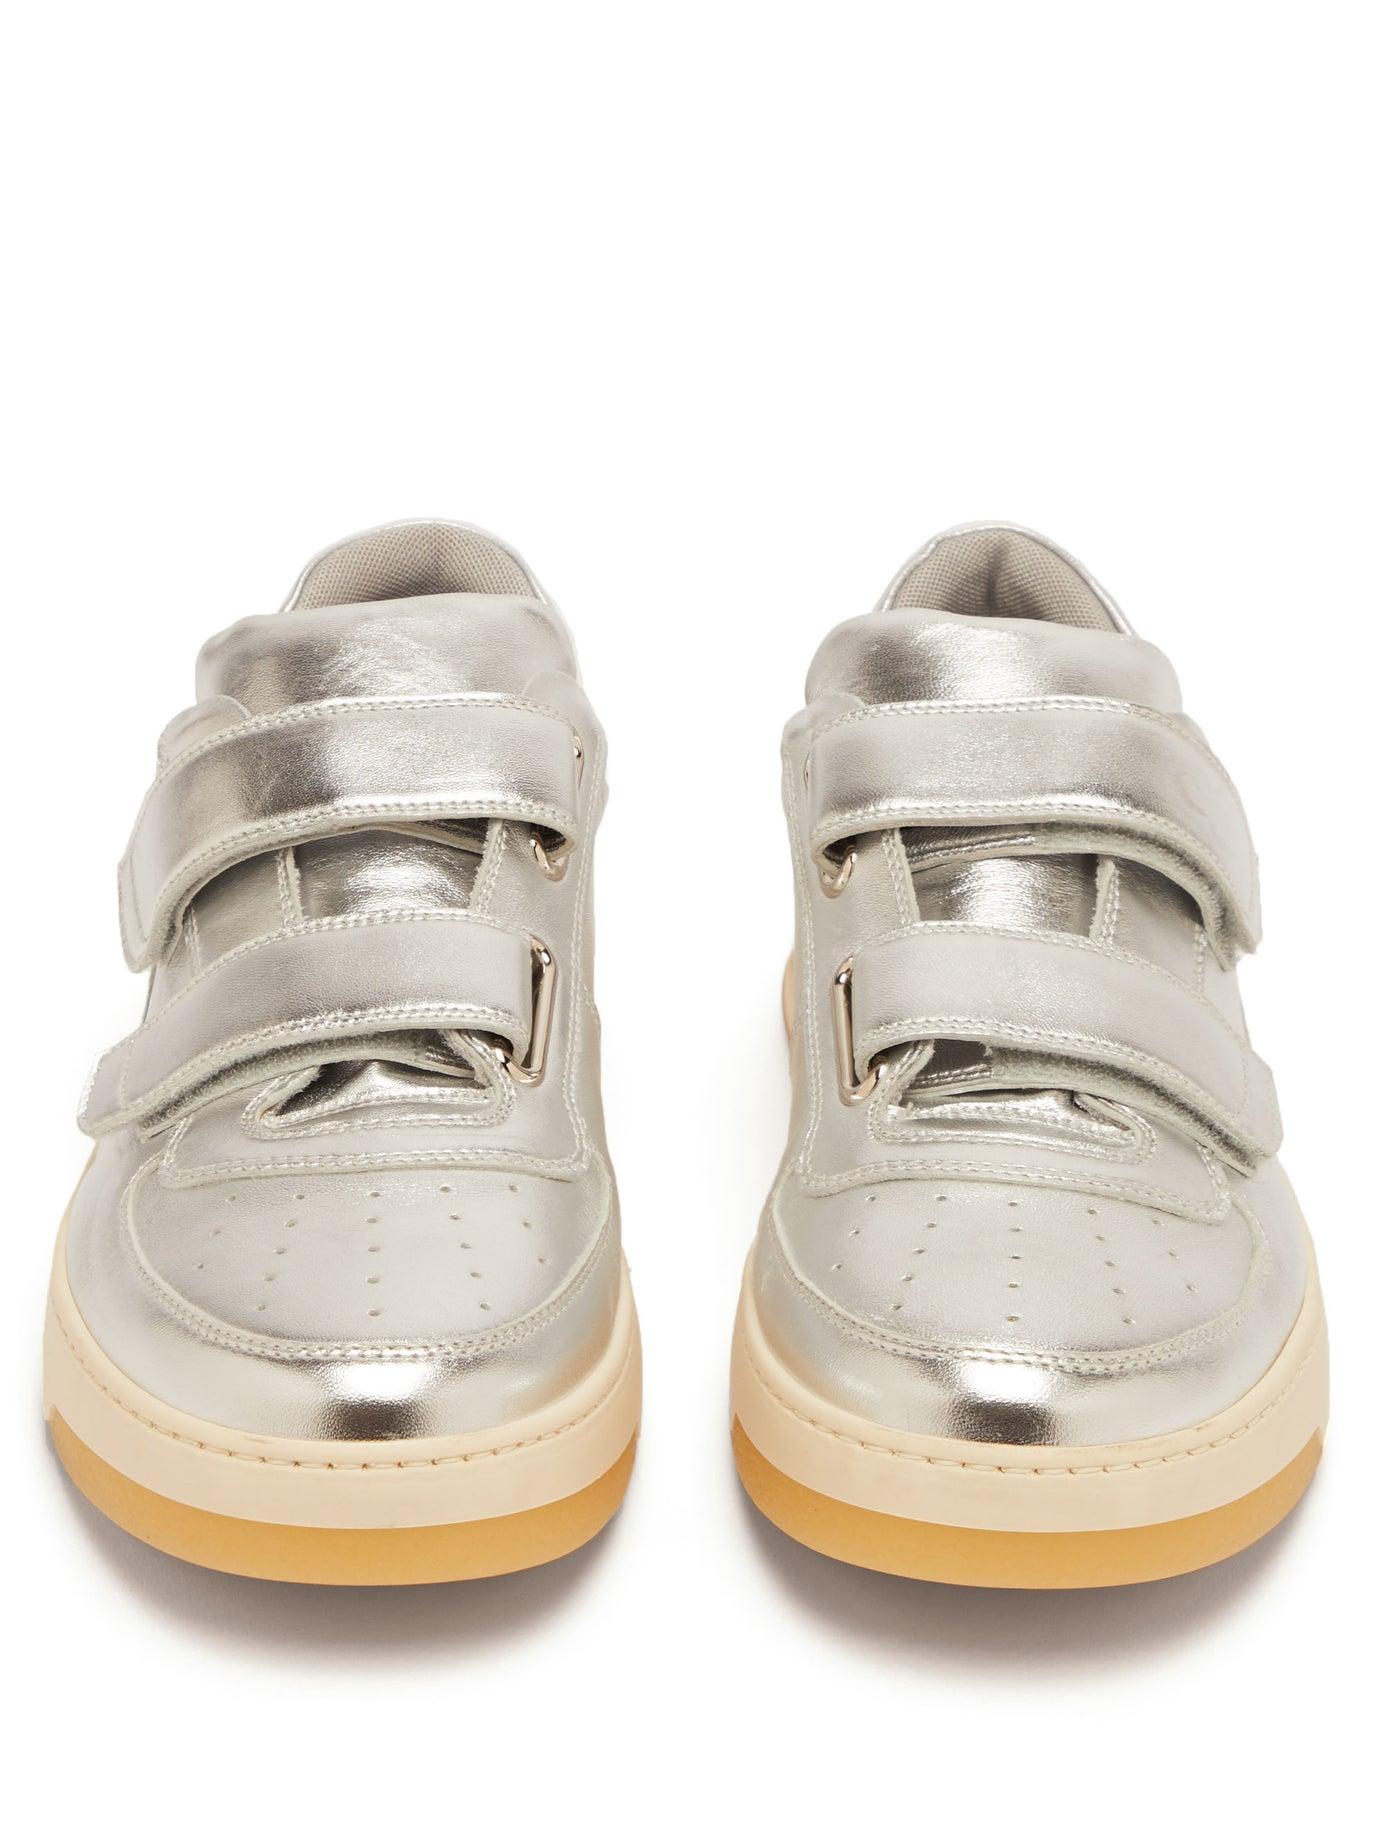 Acne Studios Perey Low-top Leather Trainers in Silver (Metallic) for Men -  Lyst